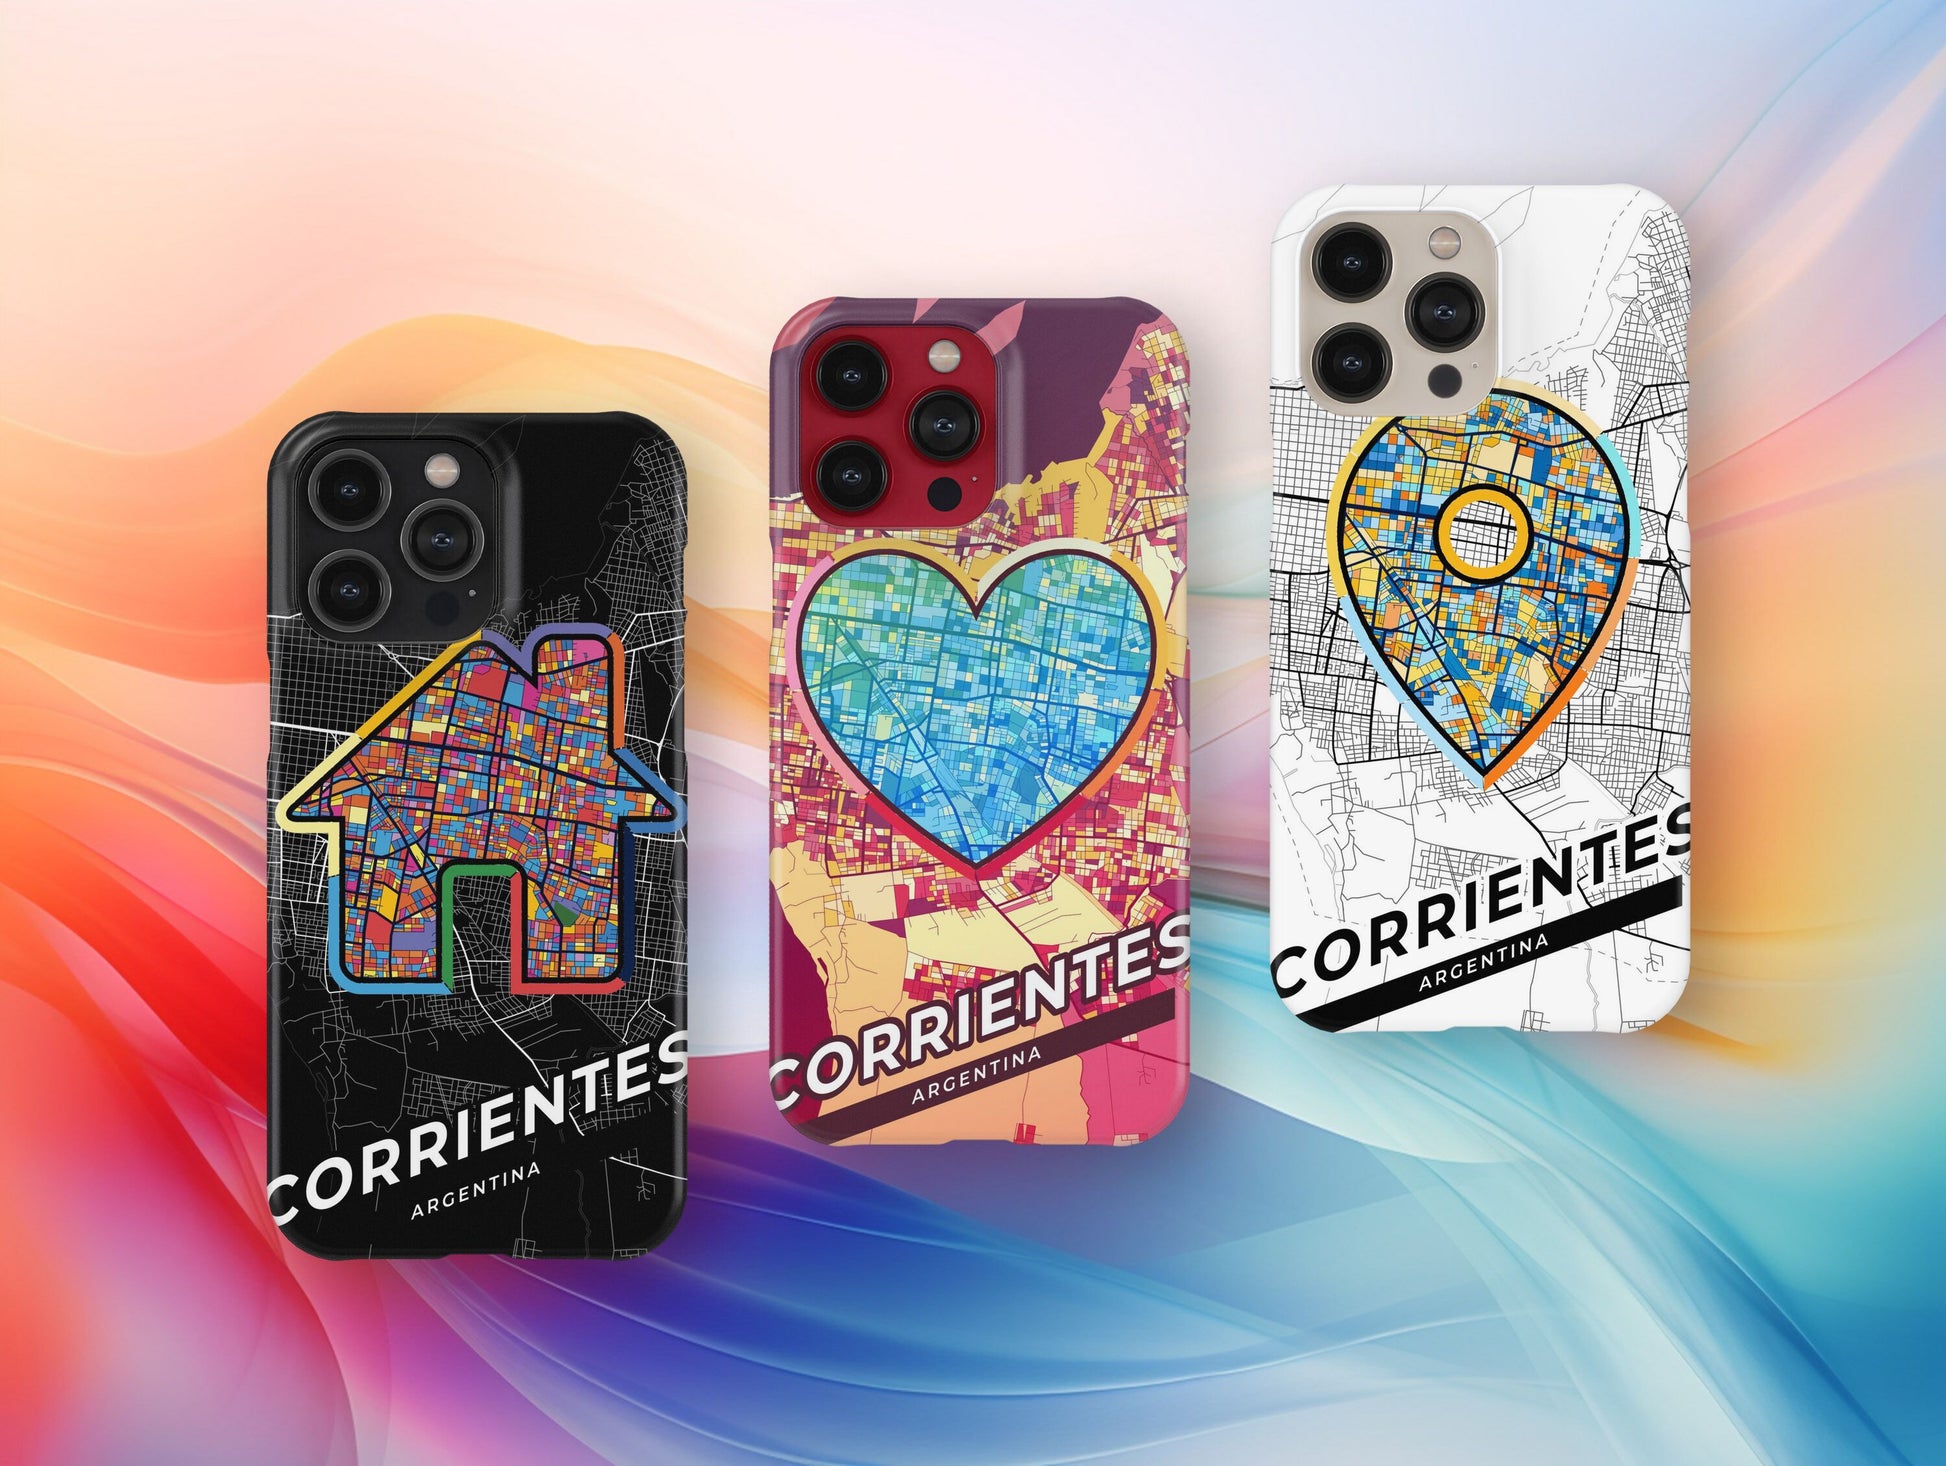 Corrientes Argentina slim phone case with colorful icon. Birthday, wedding or housewarming gift. Couple match cases.